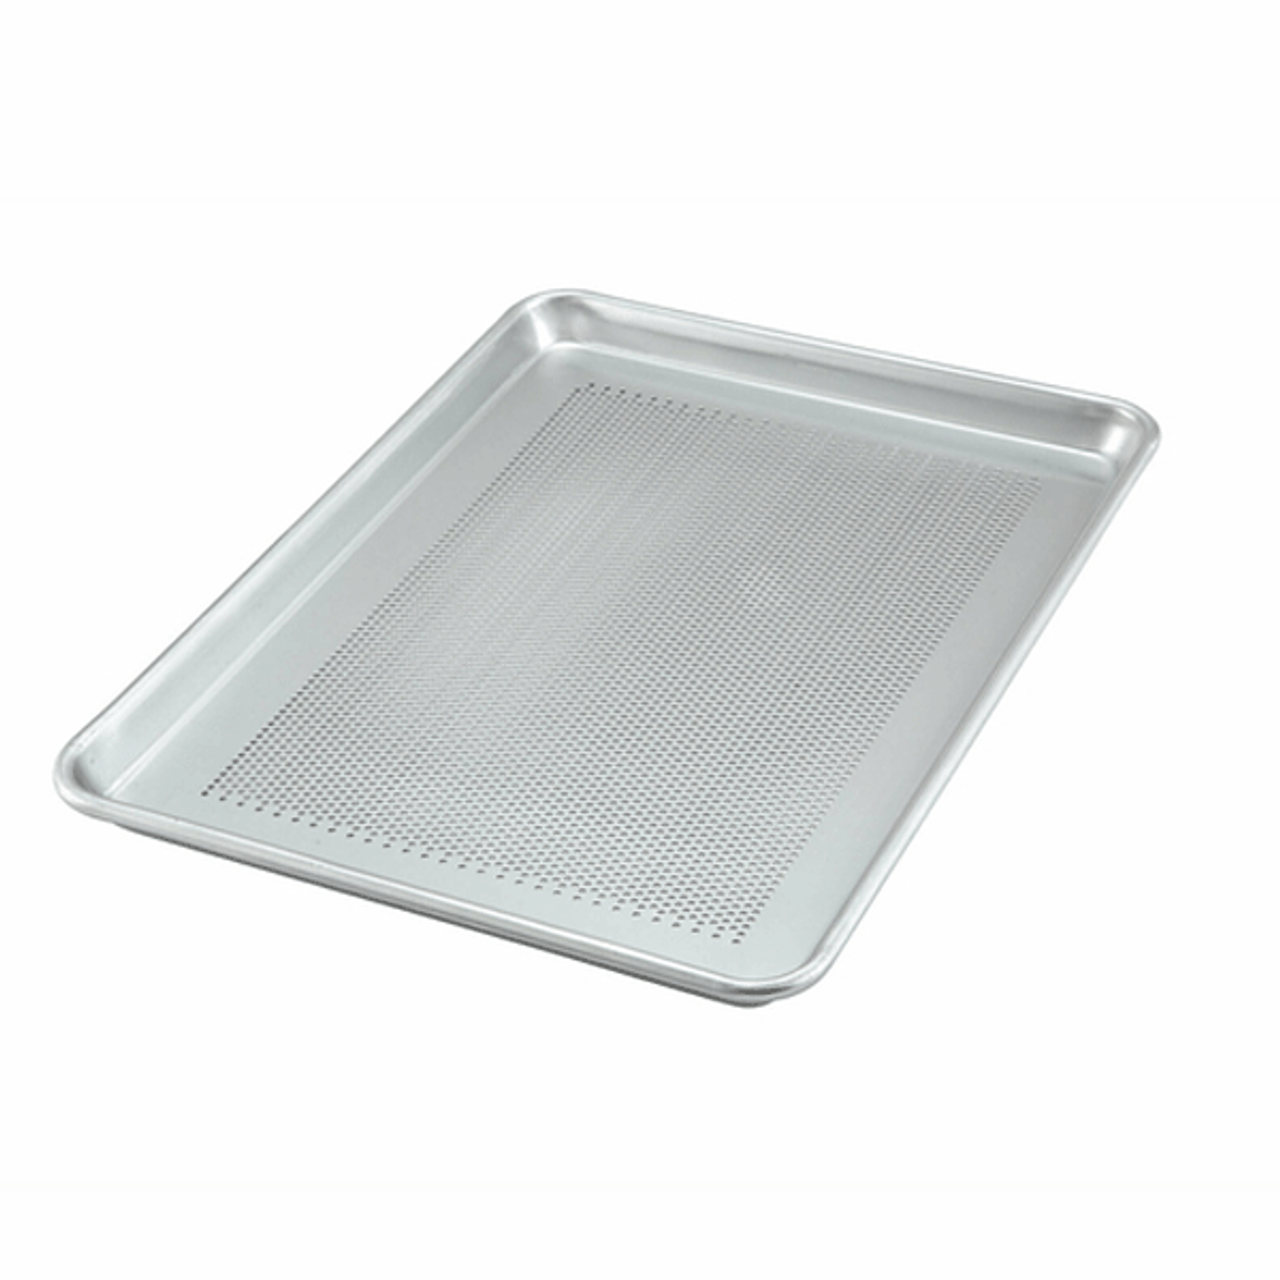 https://cdn11.bigcommerce.com/s-g3i86bef61/images/stencil/1280x1280/products/4410/4546/Winco-ALXP-1318P-Perforated-Sheet-Pan__89964.1677103180.png?c=1